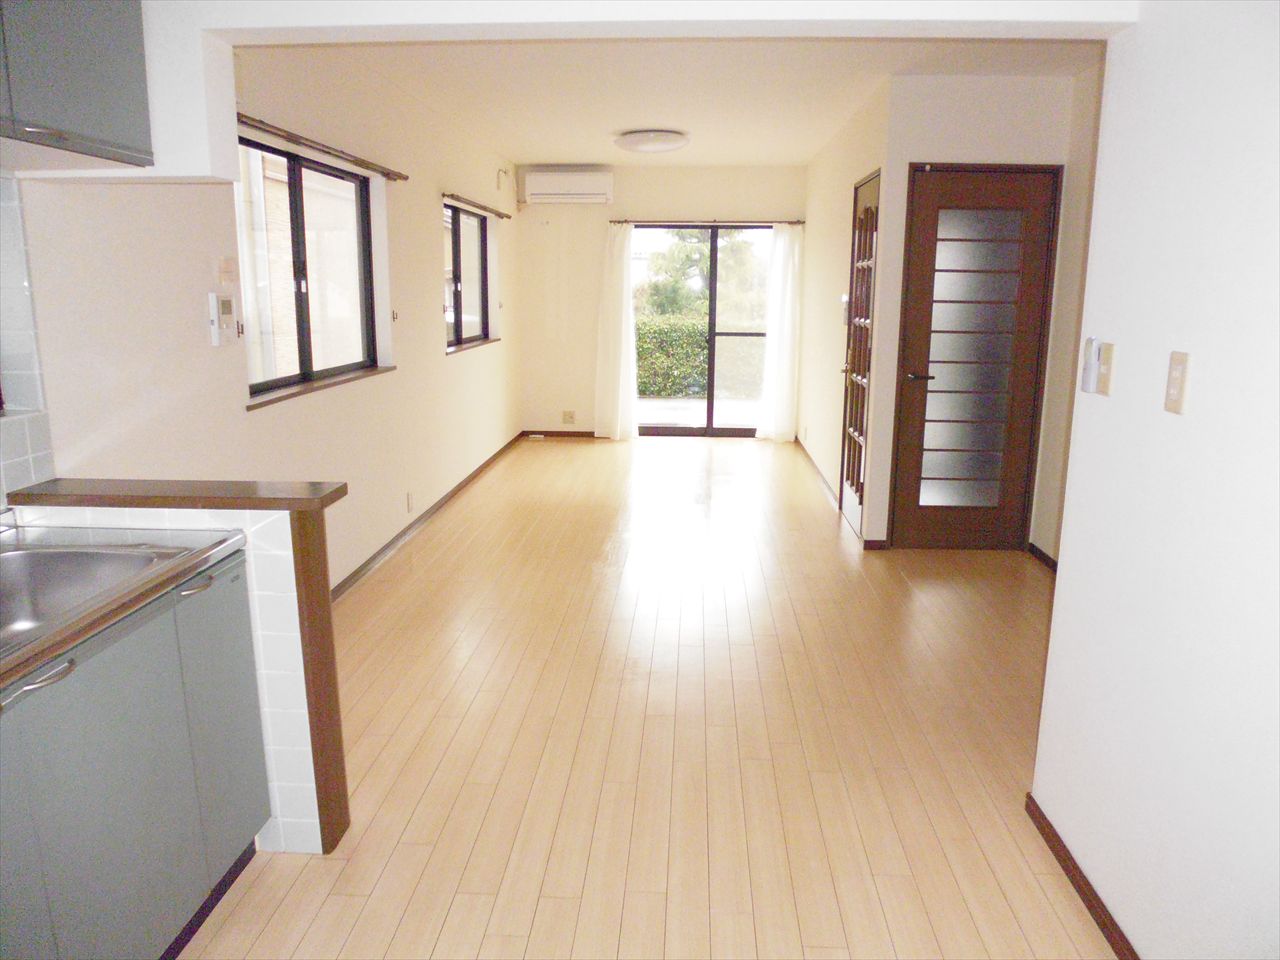 Living and room. Light enters a lot from Hiroi living window!